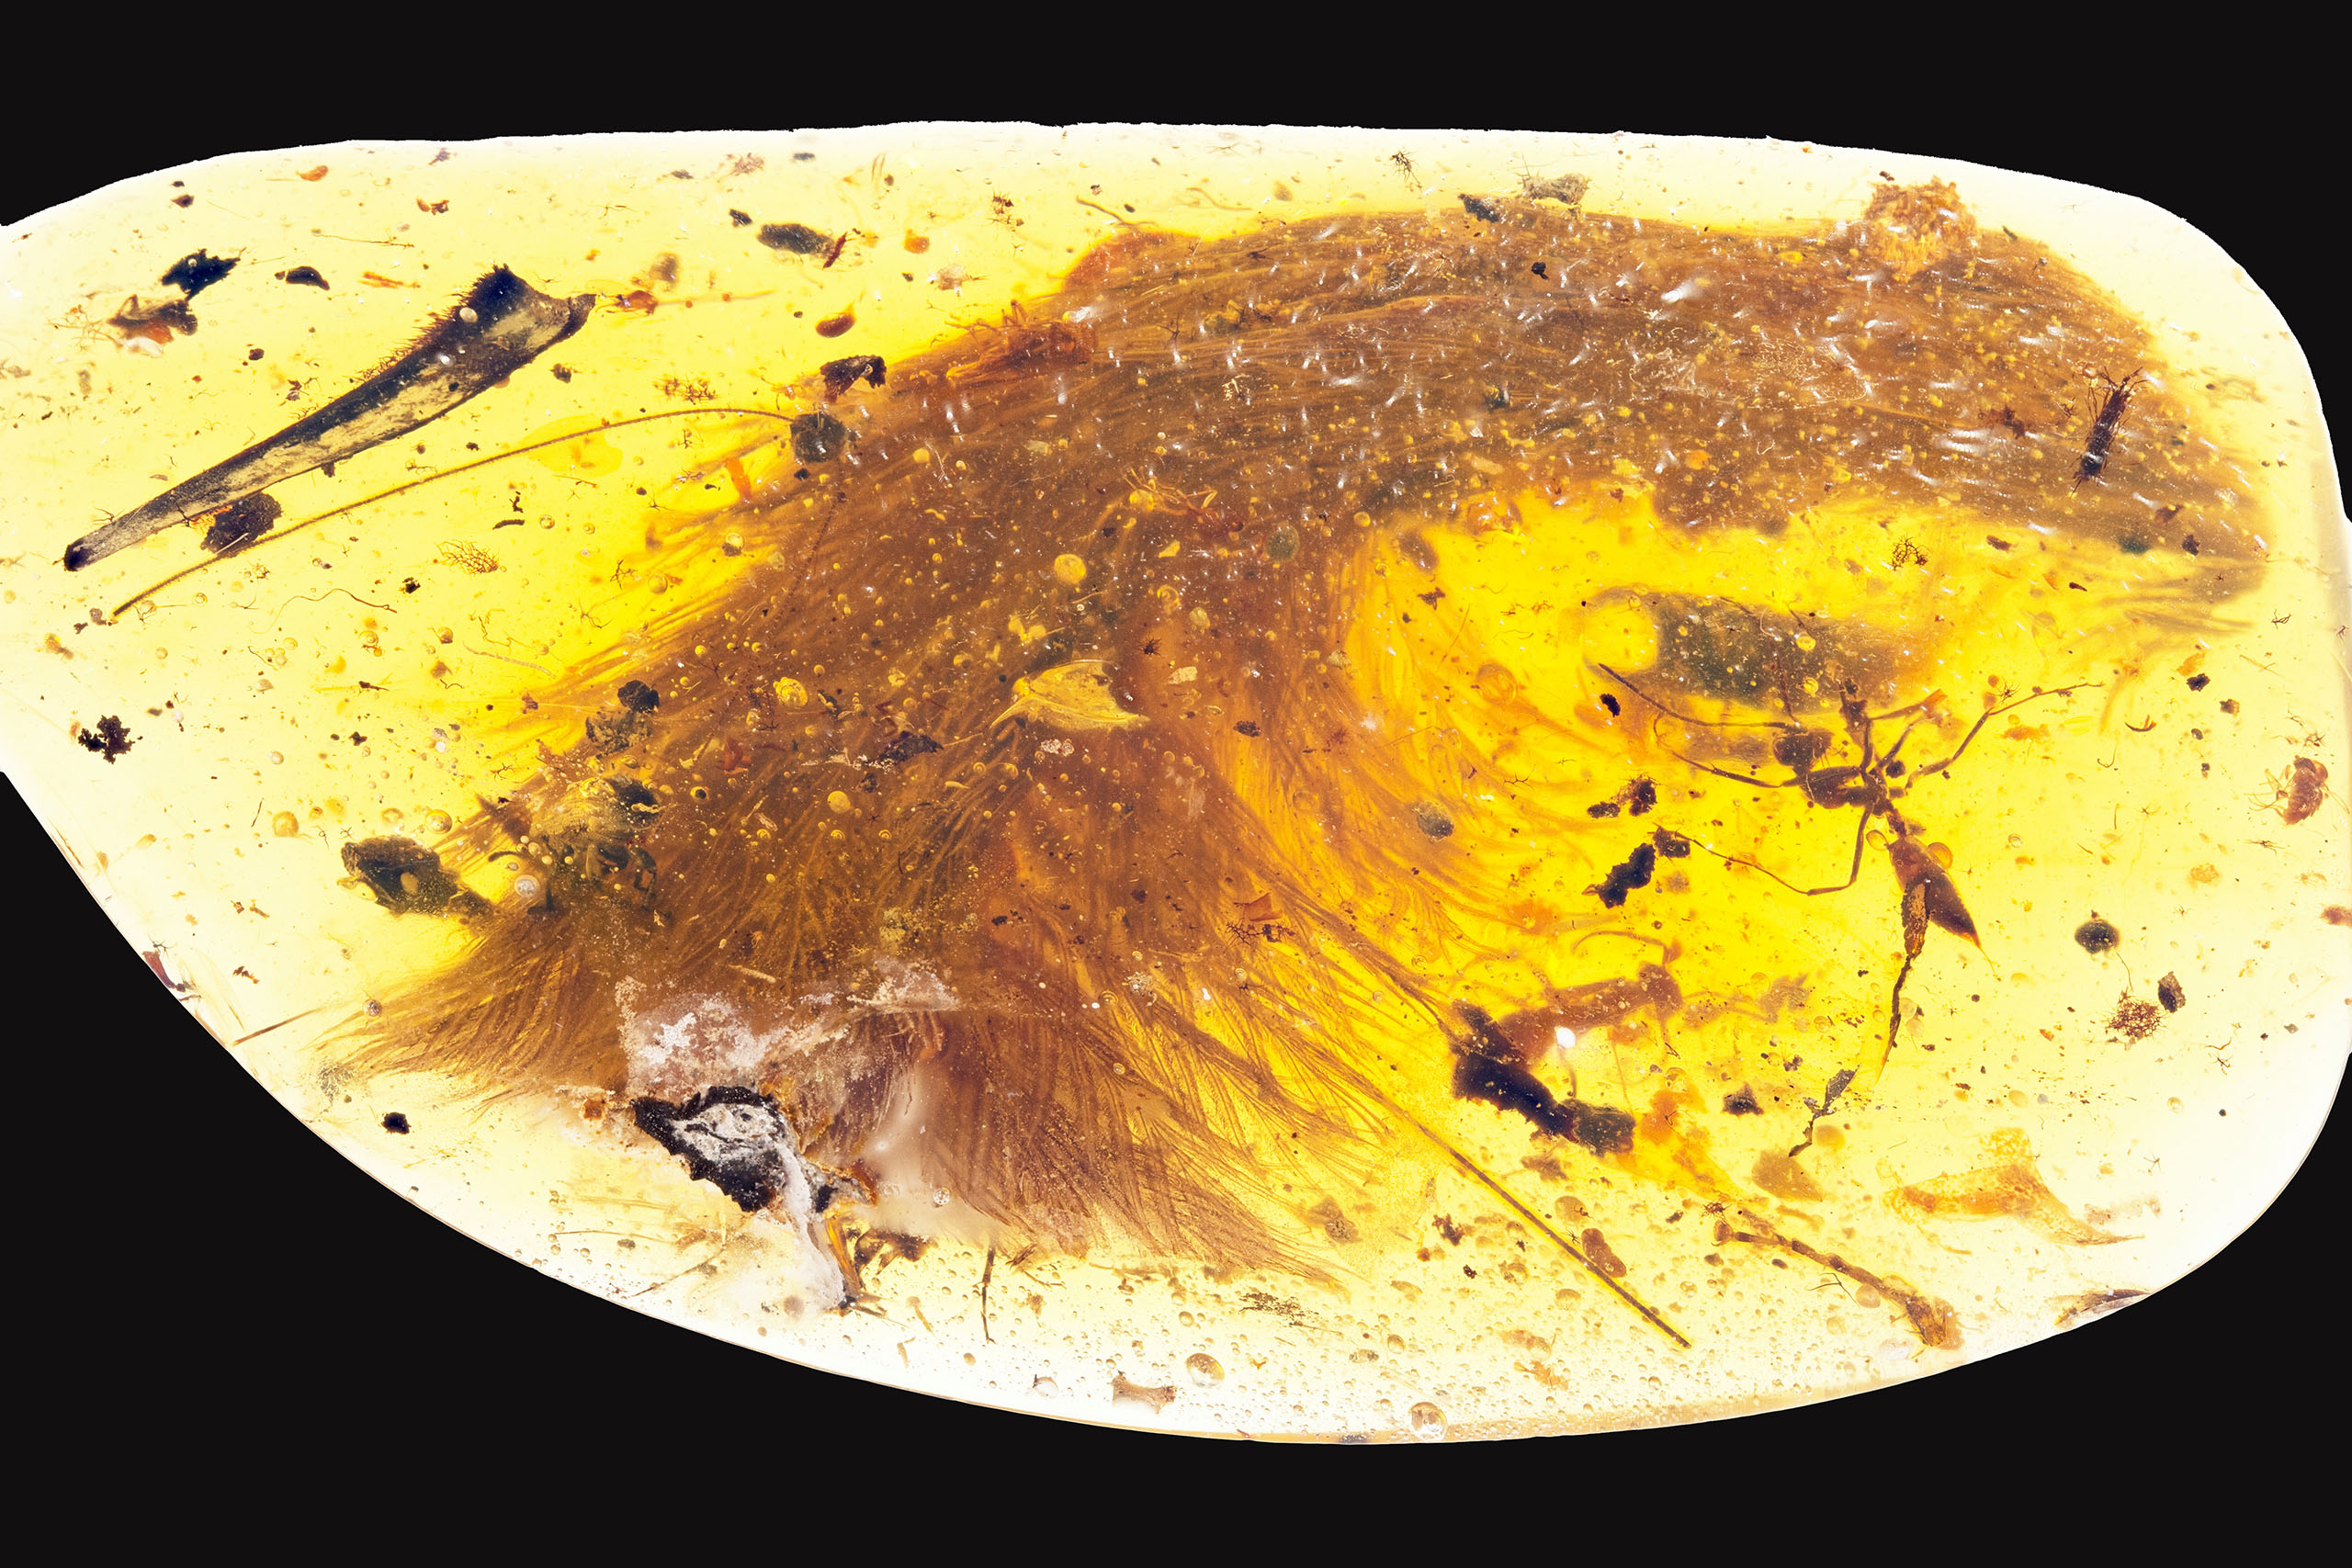 A chunk of amber - fossilized resin - shows the tip of a preserved dinosaur tail section in this image released by the Royal Saskatchewan Museum in Canada on Dec. 8, 2016. (R.C. McKellar—Saskatchewan Museum/Reuters)